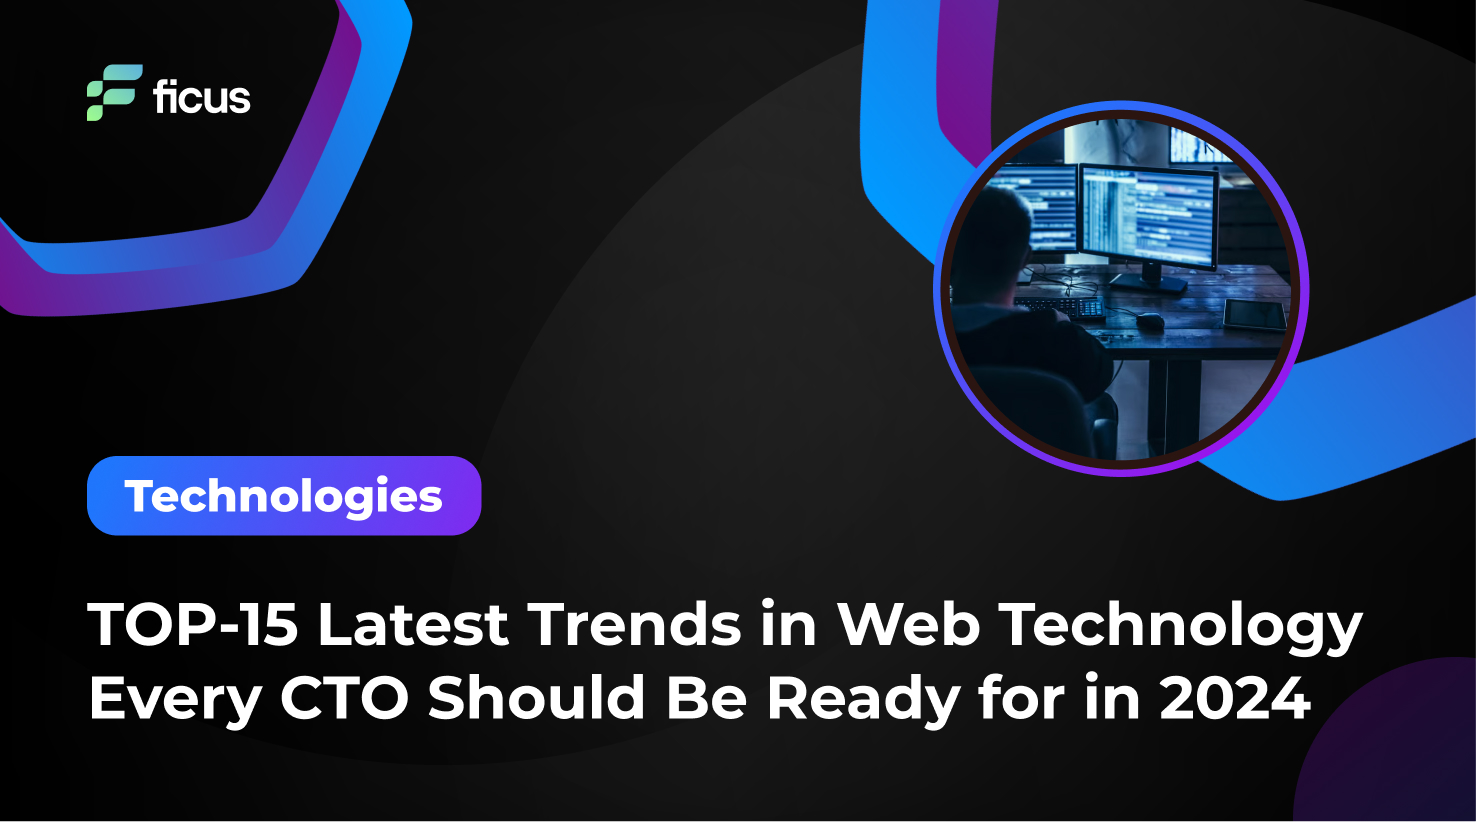 TOP-15-Latest-Trends-in-Web-Technology-Every-CTO-Should-Be-Ready-for-in-2024